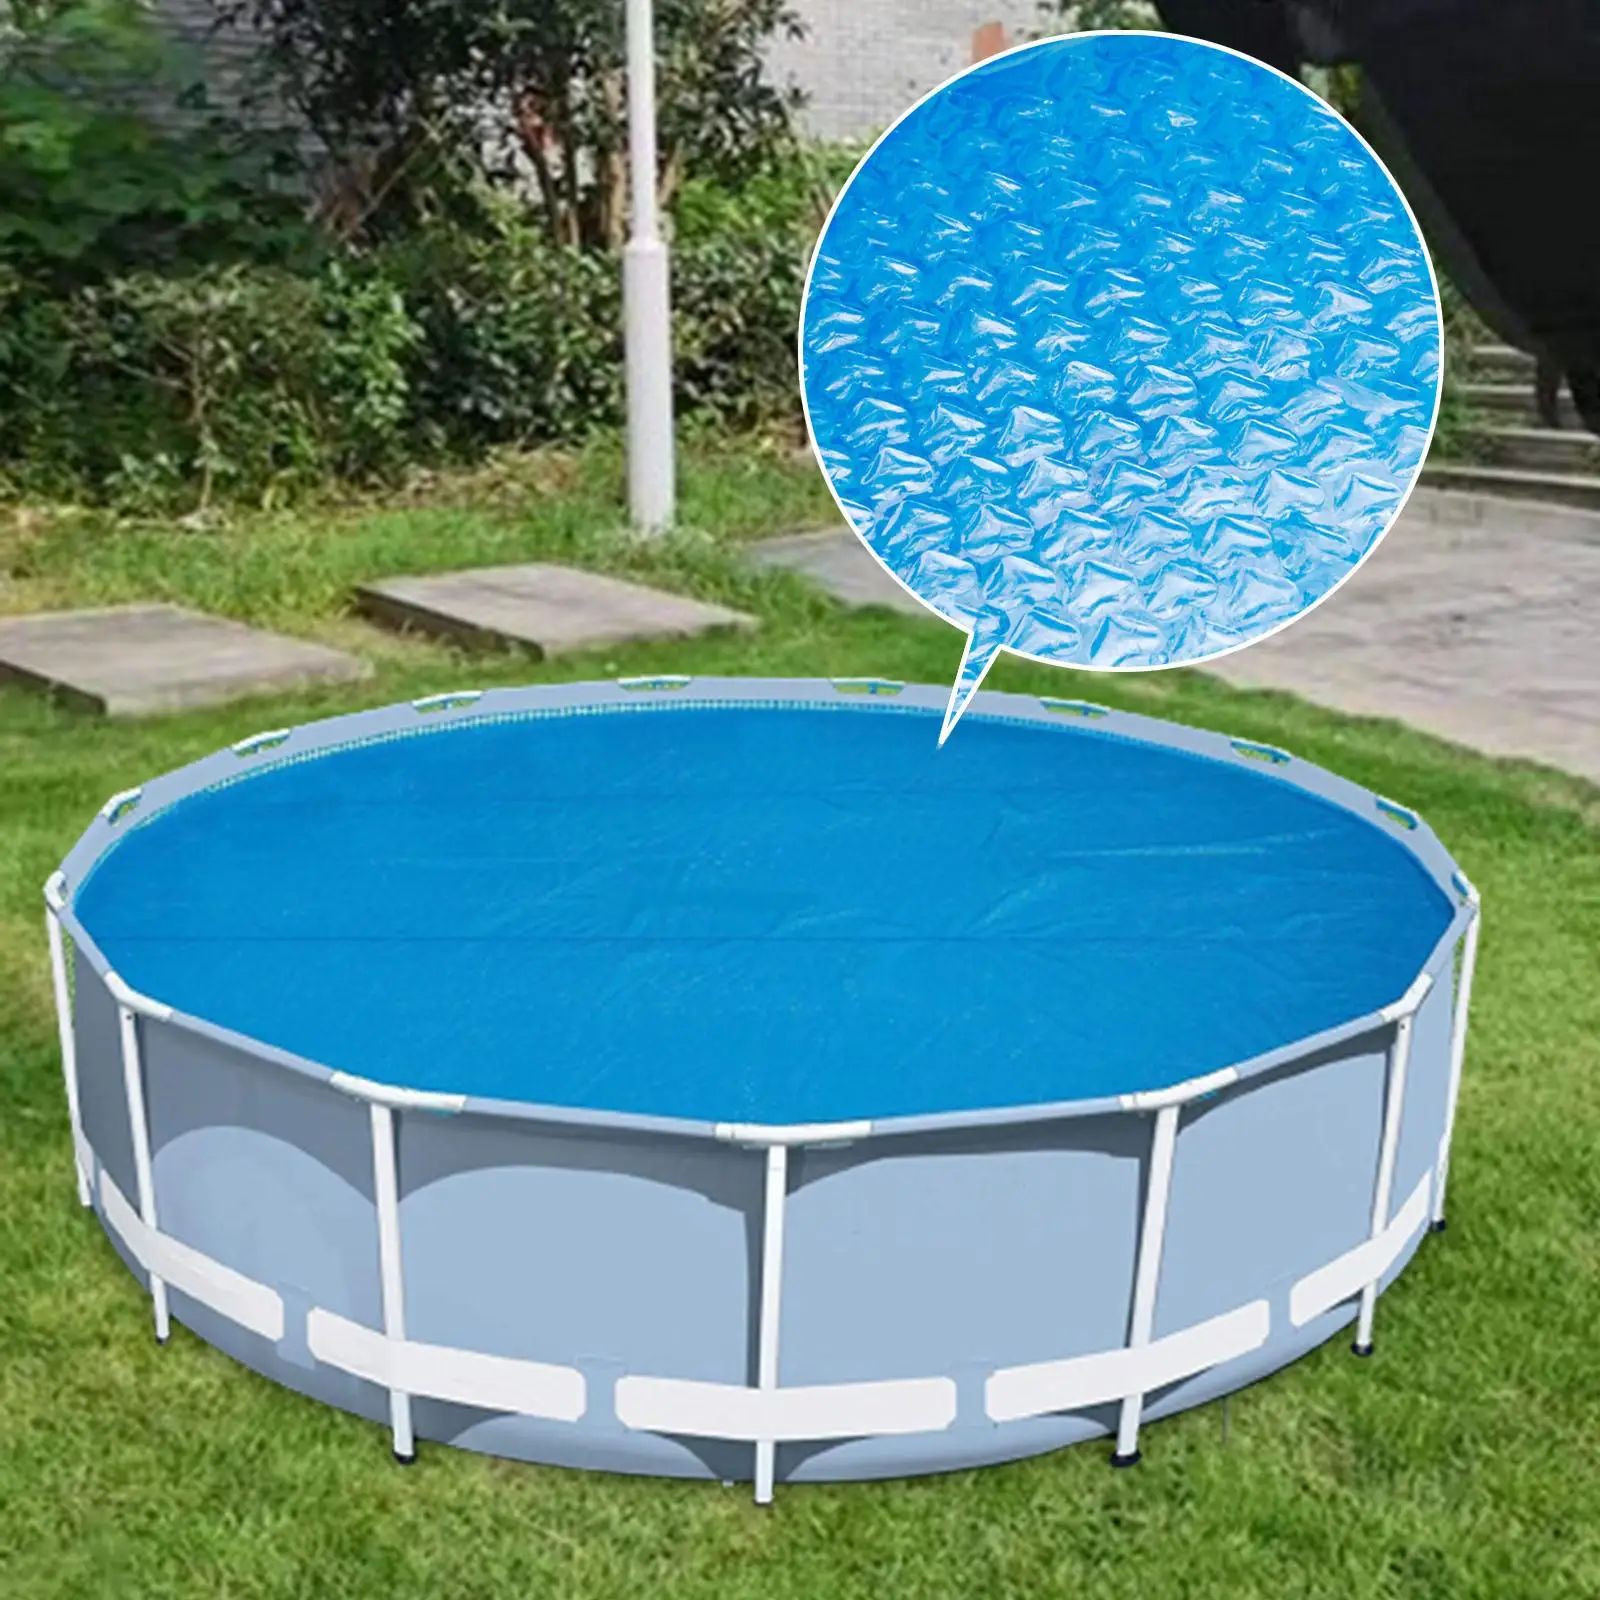 Swimming cover Round cover Waterproof Dustproof Mat Pool Cloth for Garden Outdoor Pool Paddling Inflatable Pool